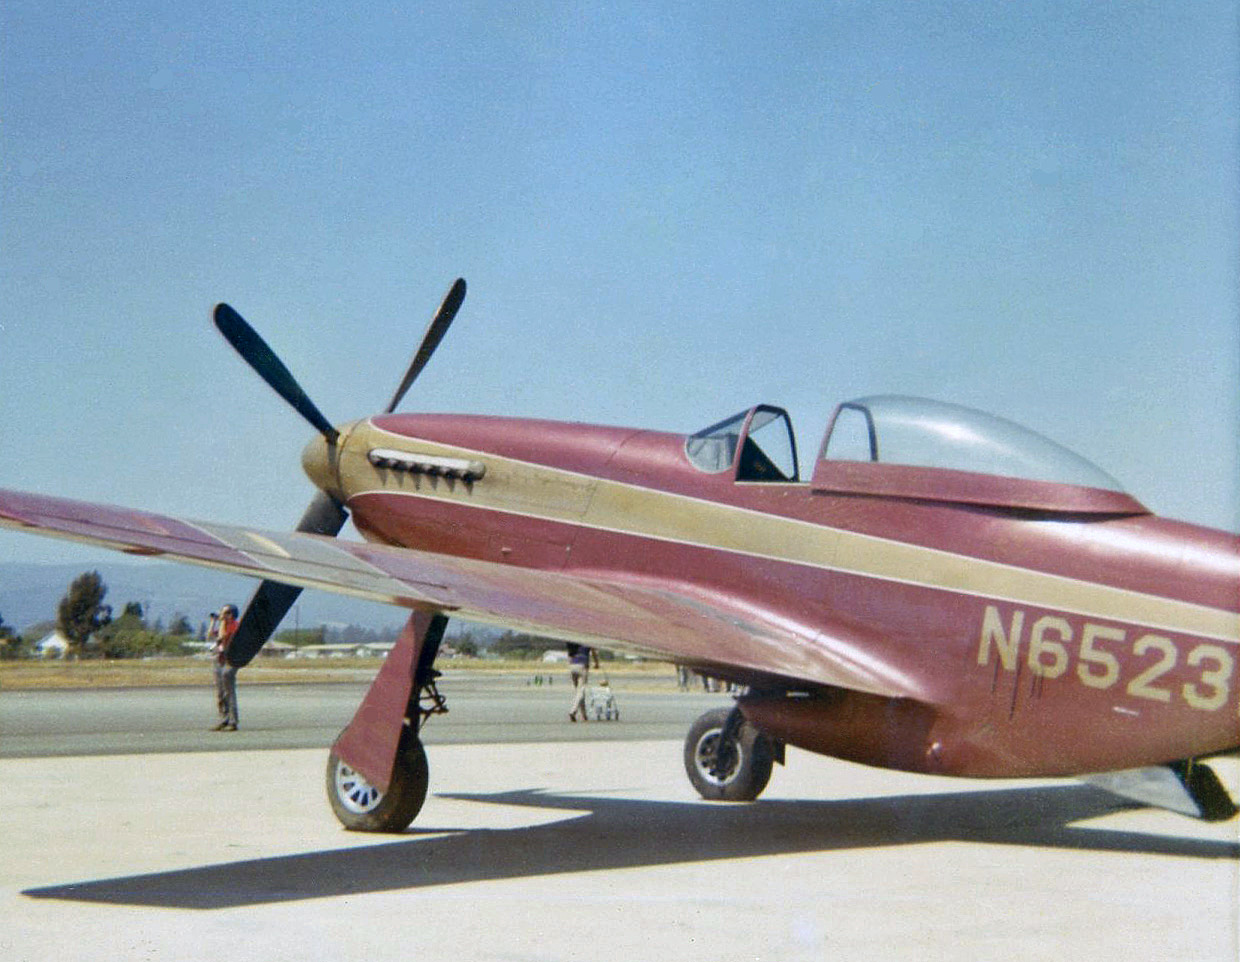 Taken at the annual Watsonville, California airshow in 1970, this is a privately-owned P-51 Mustang WWII fighter plane that I saw many times flying (low) over the San Francisco Bay Area. View full size.